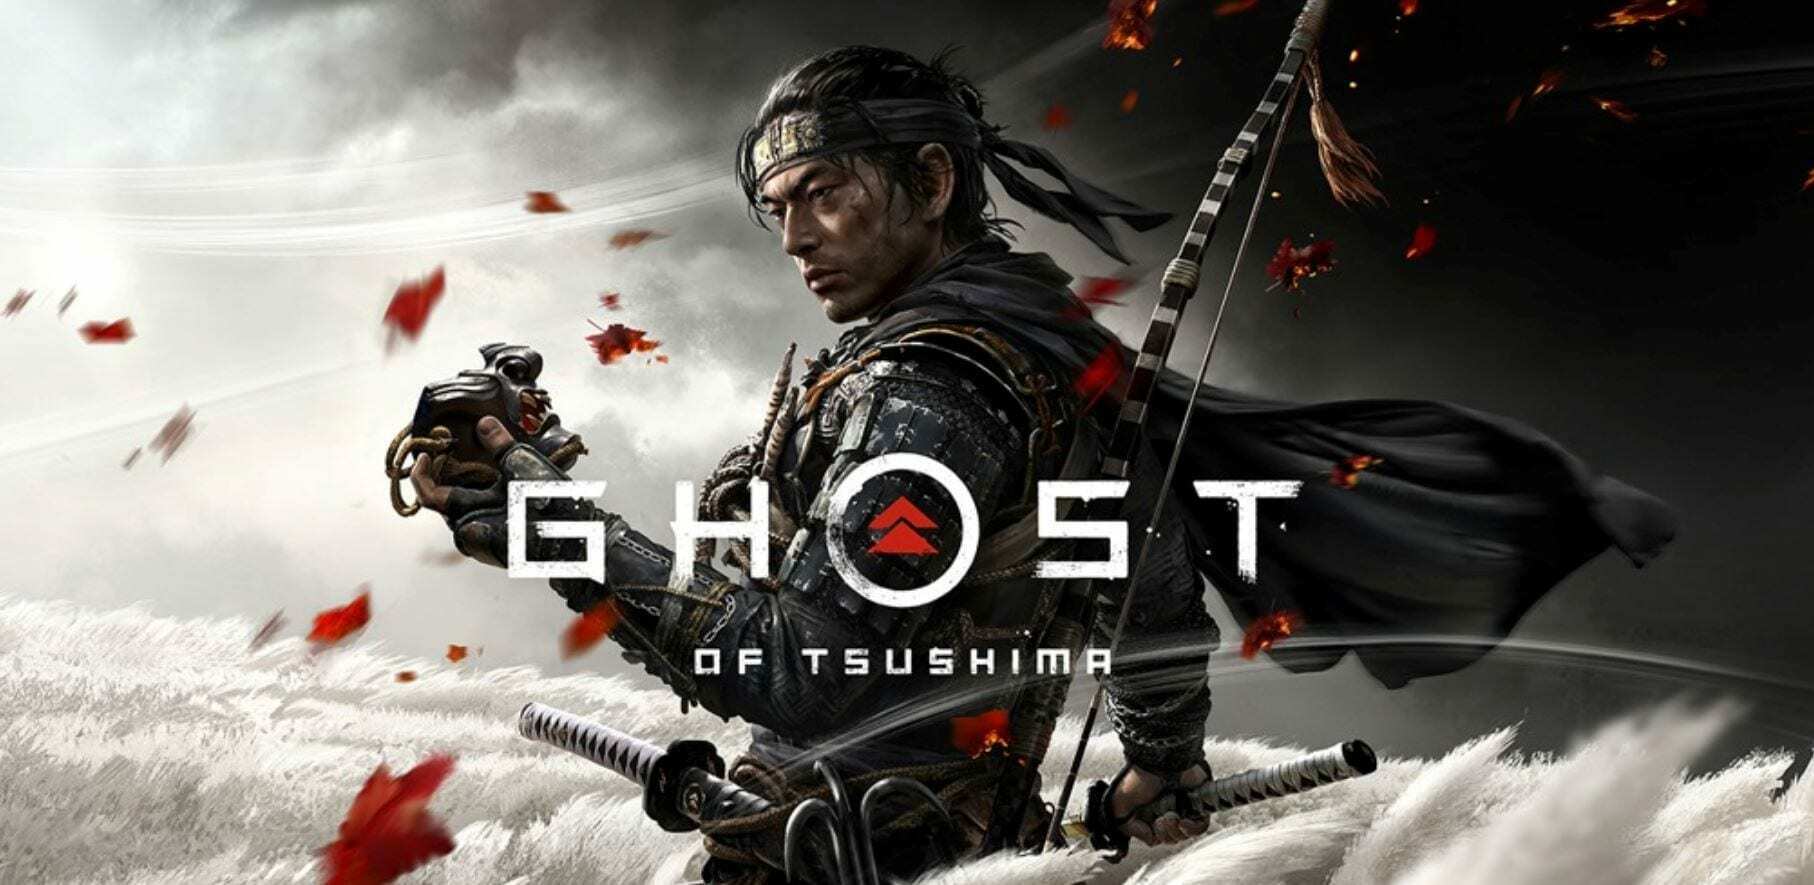 Zach, I thought the Origami Killer was that other guy's problem? Ghost-of-tsushima-teased-game-awards